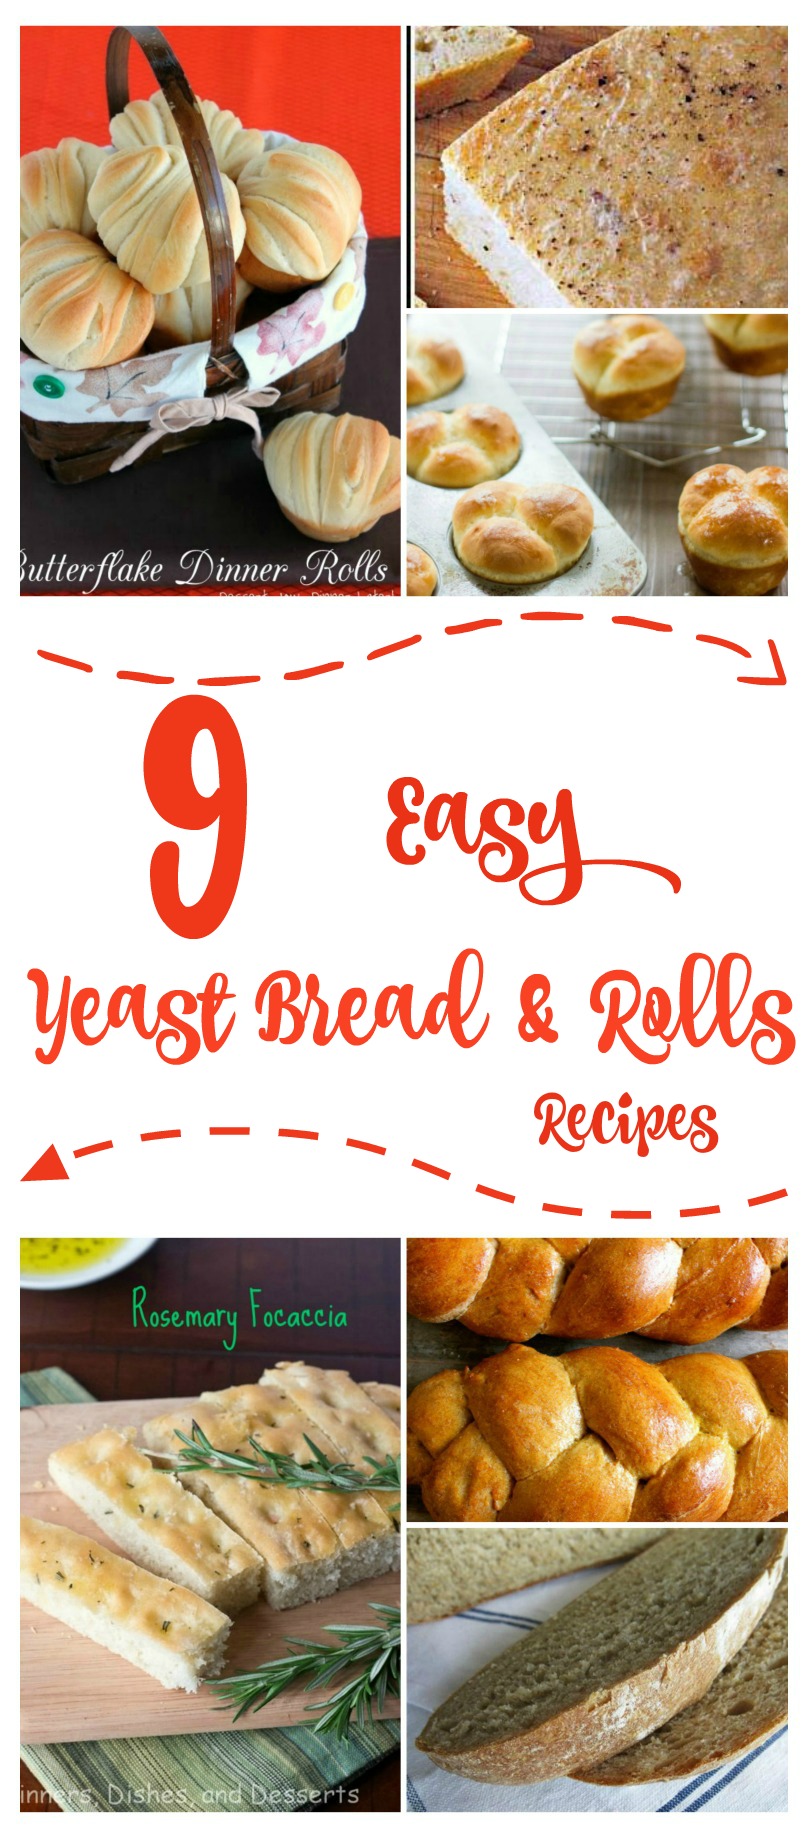 Are you considering learning how to make your own bread? Here are 9 easy yeast bread & rolls recipes that are perfect for beginners!